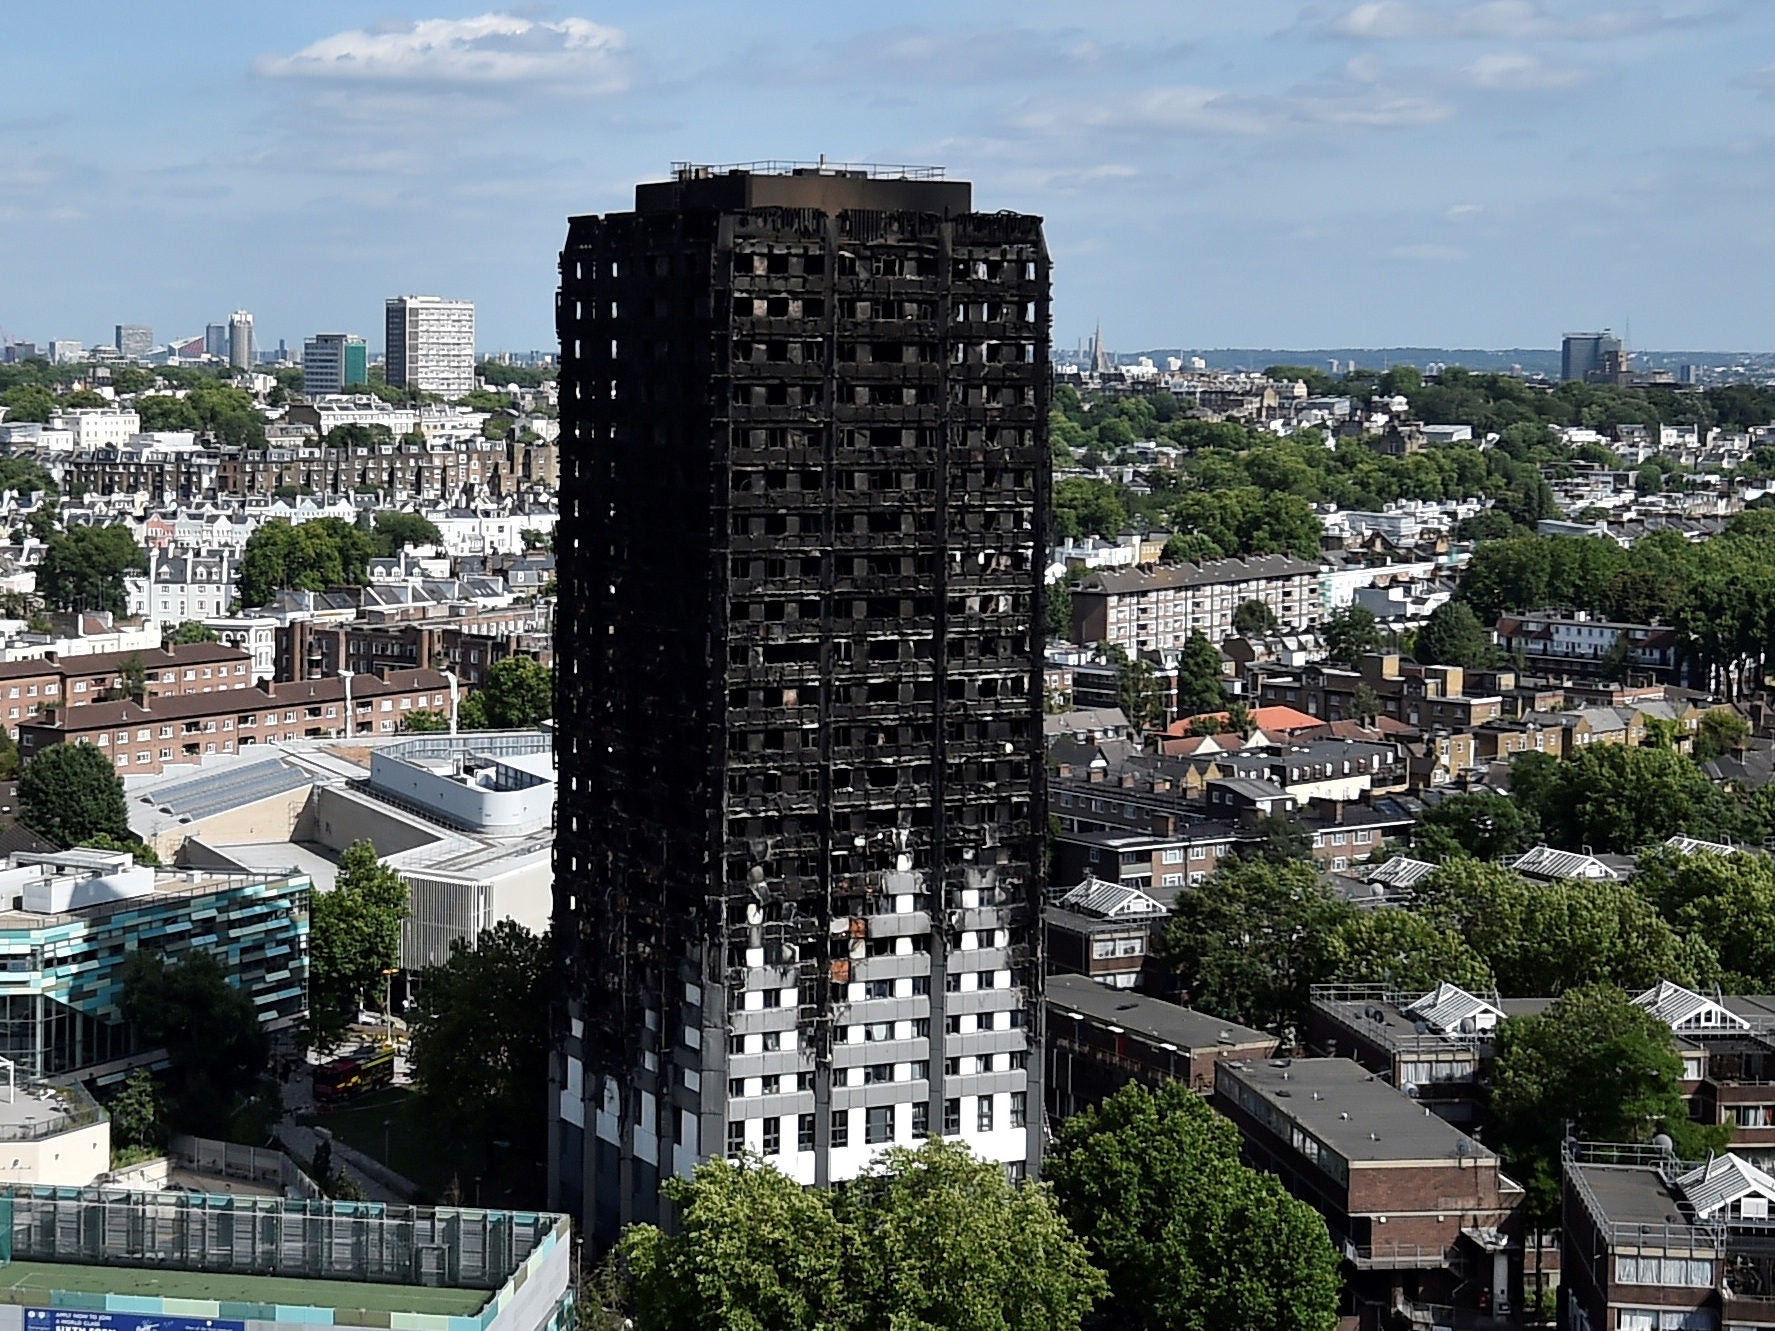 Grenfell Inquiry chairman rejects bid for reporting restriction on parts of tower fire probe